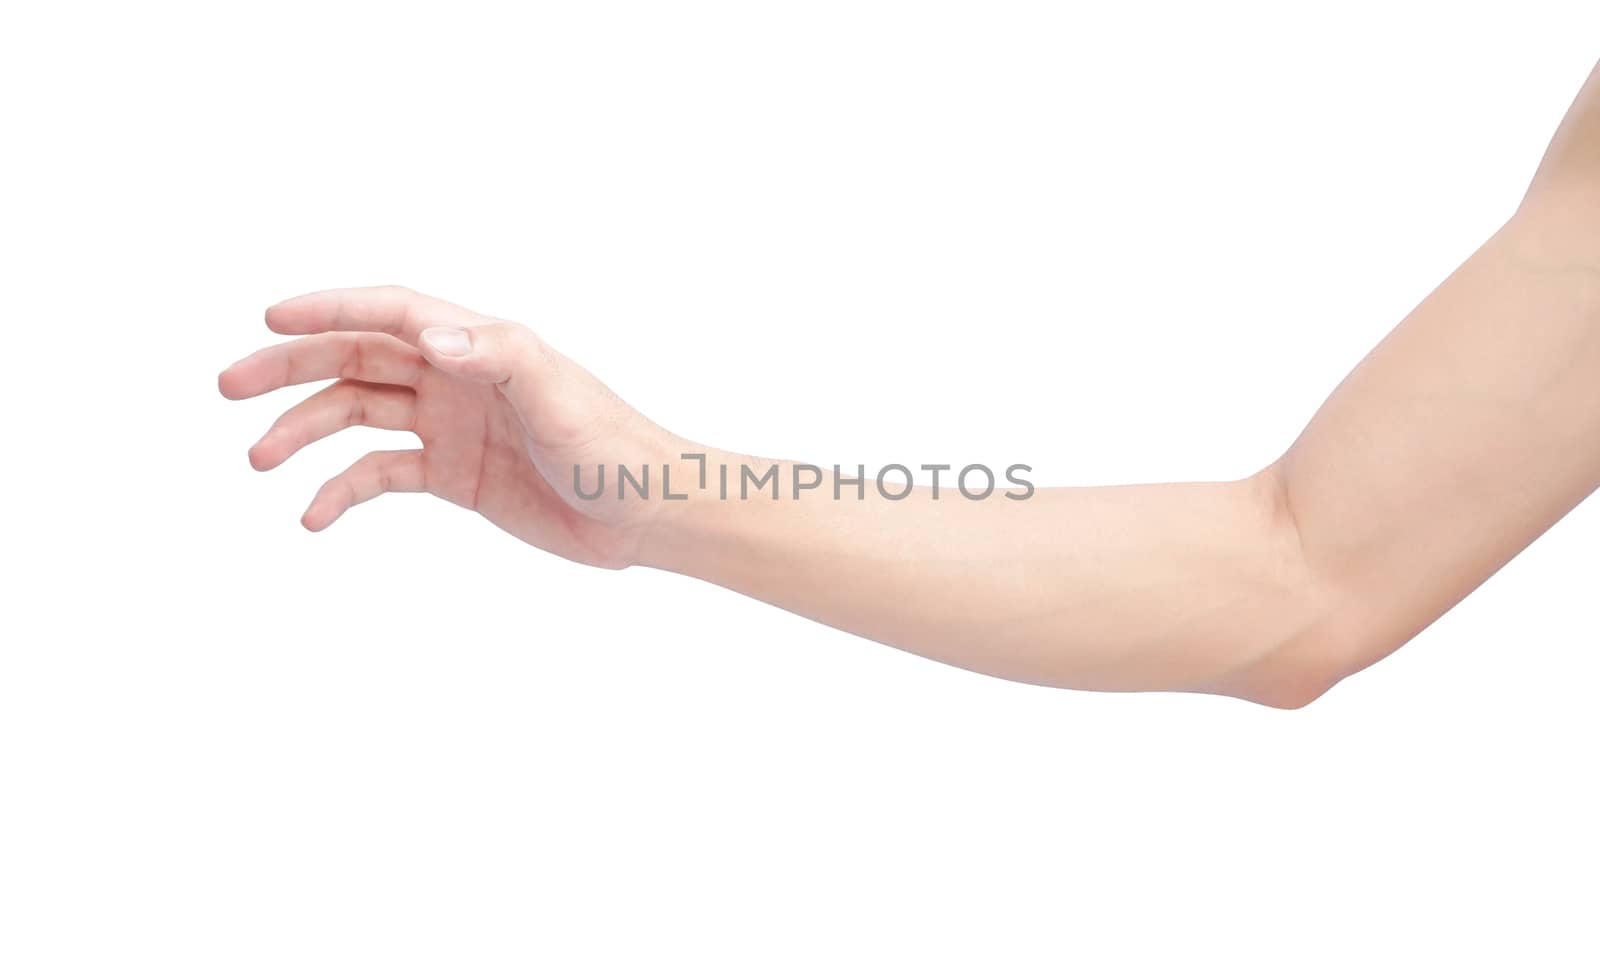 Man hands holding something on white background for product adve by pt.pongsak@gmail.com